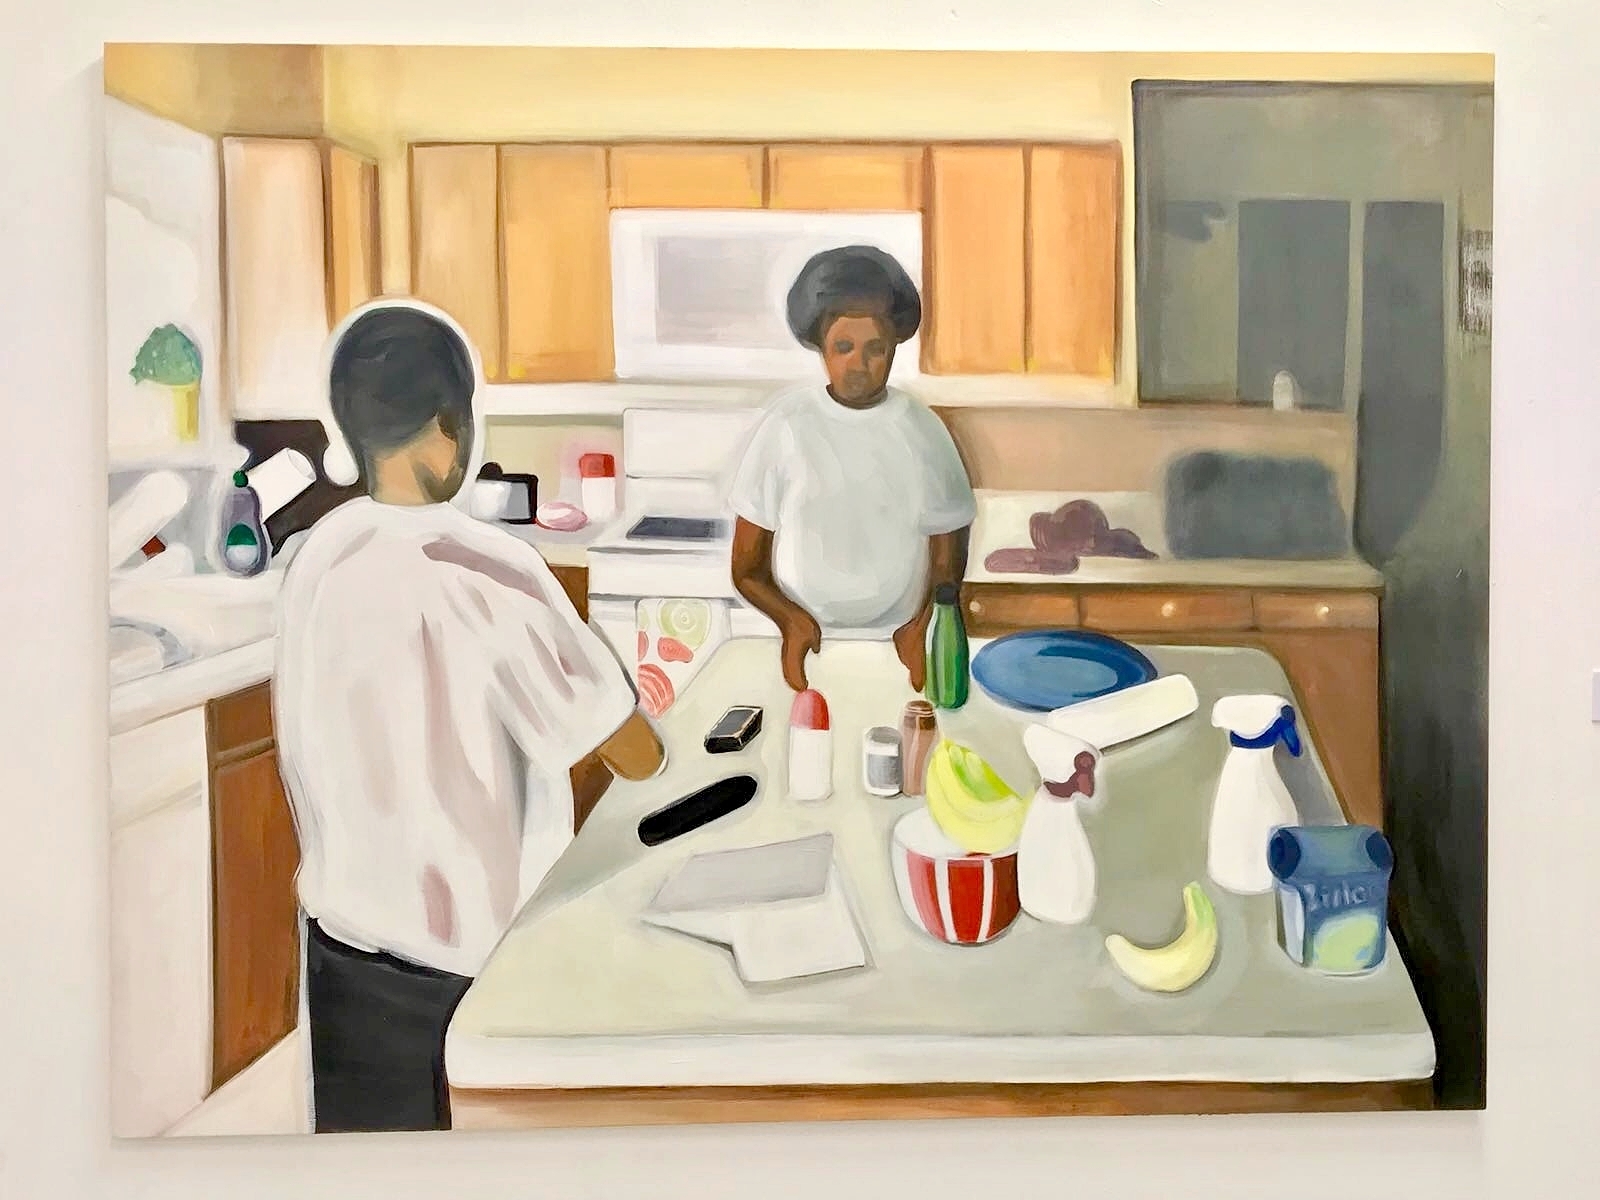   The Kitchen,  2018 Oil on canvas 55 x 71 inches 140 x 180 cm   